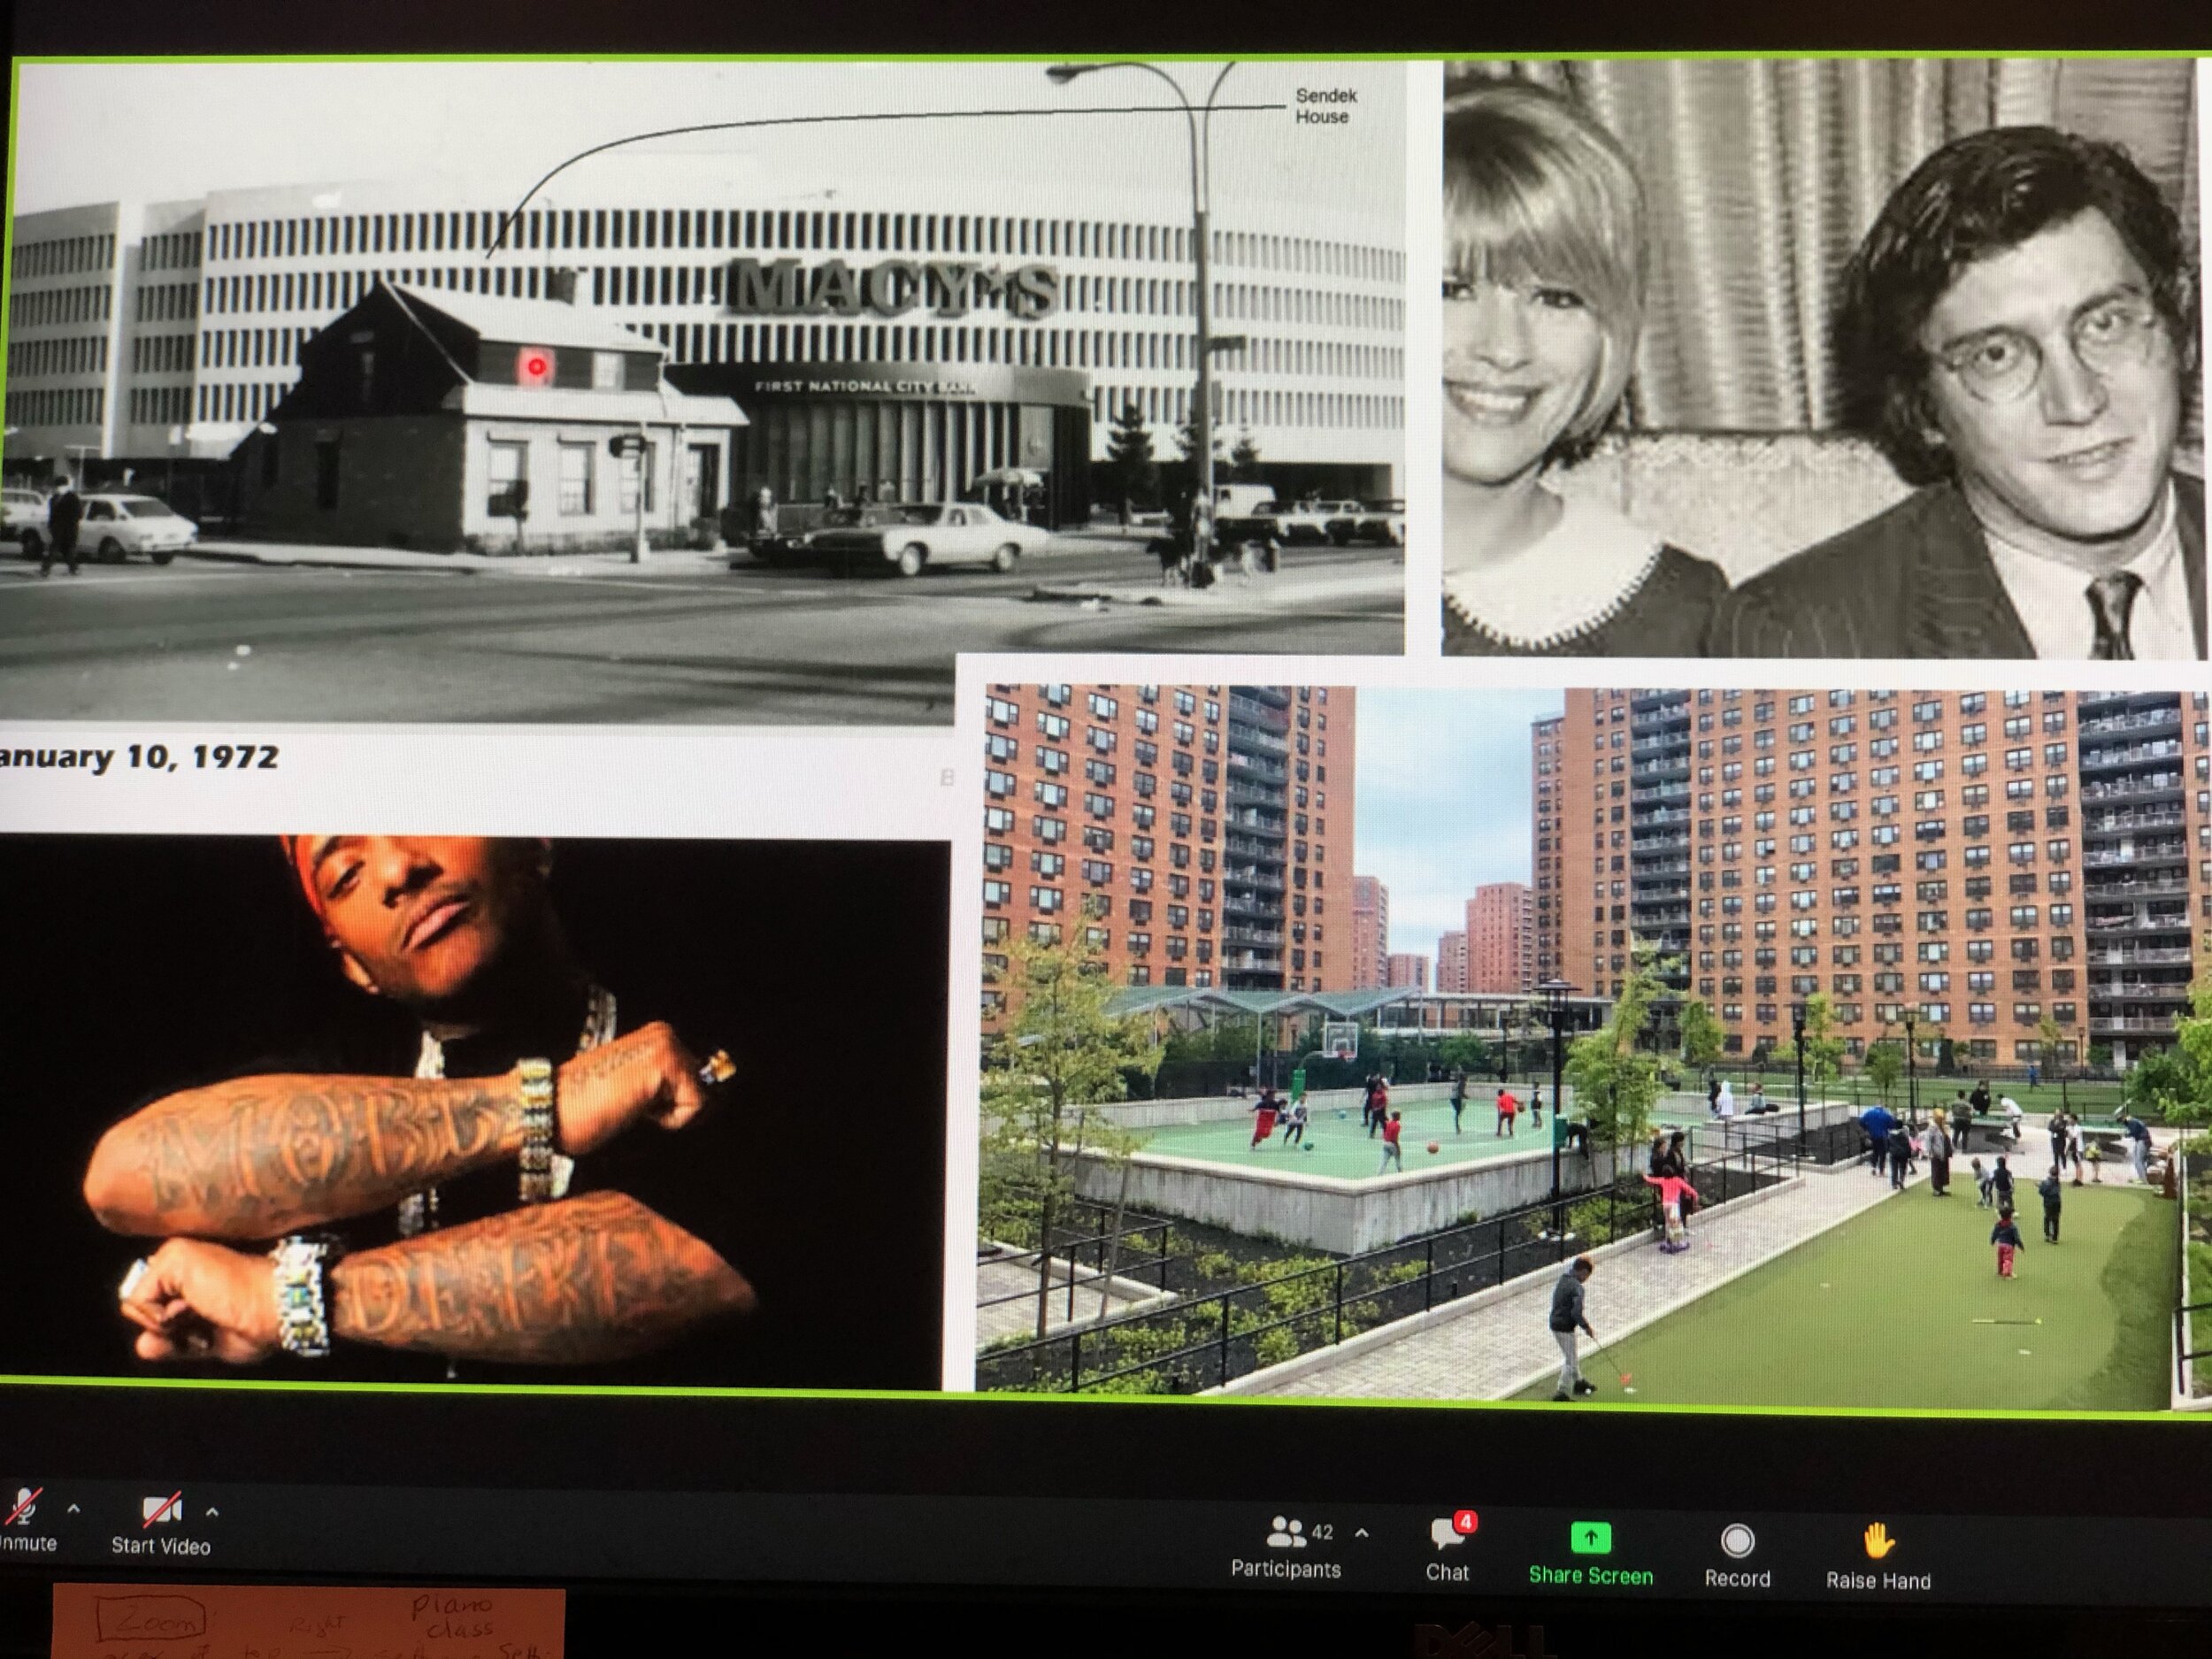  The songwriting team of Ellie Greenwich &amp; Jeff Barry ( Chapel of Love, Be My Baby, Da Doo Ron Ron, Leader of the Pack, River Deep, Mountain High ) lived in Lefrak CIty.  The rapper Prodigy lived there as well. Mrs. Sendek wouldn’t sell her home 